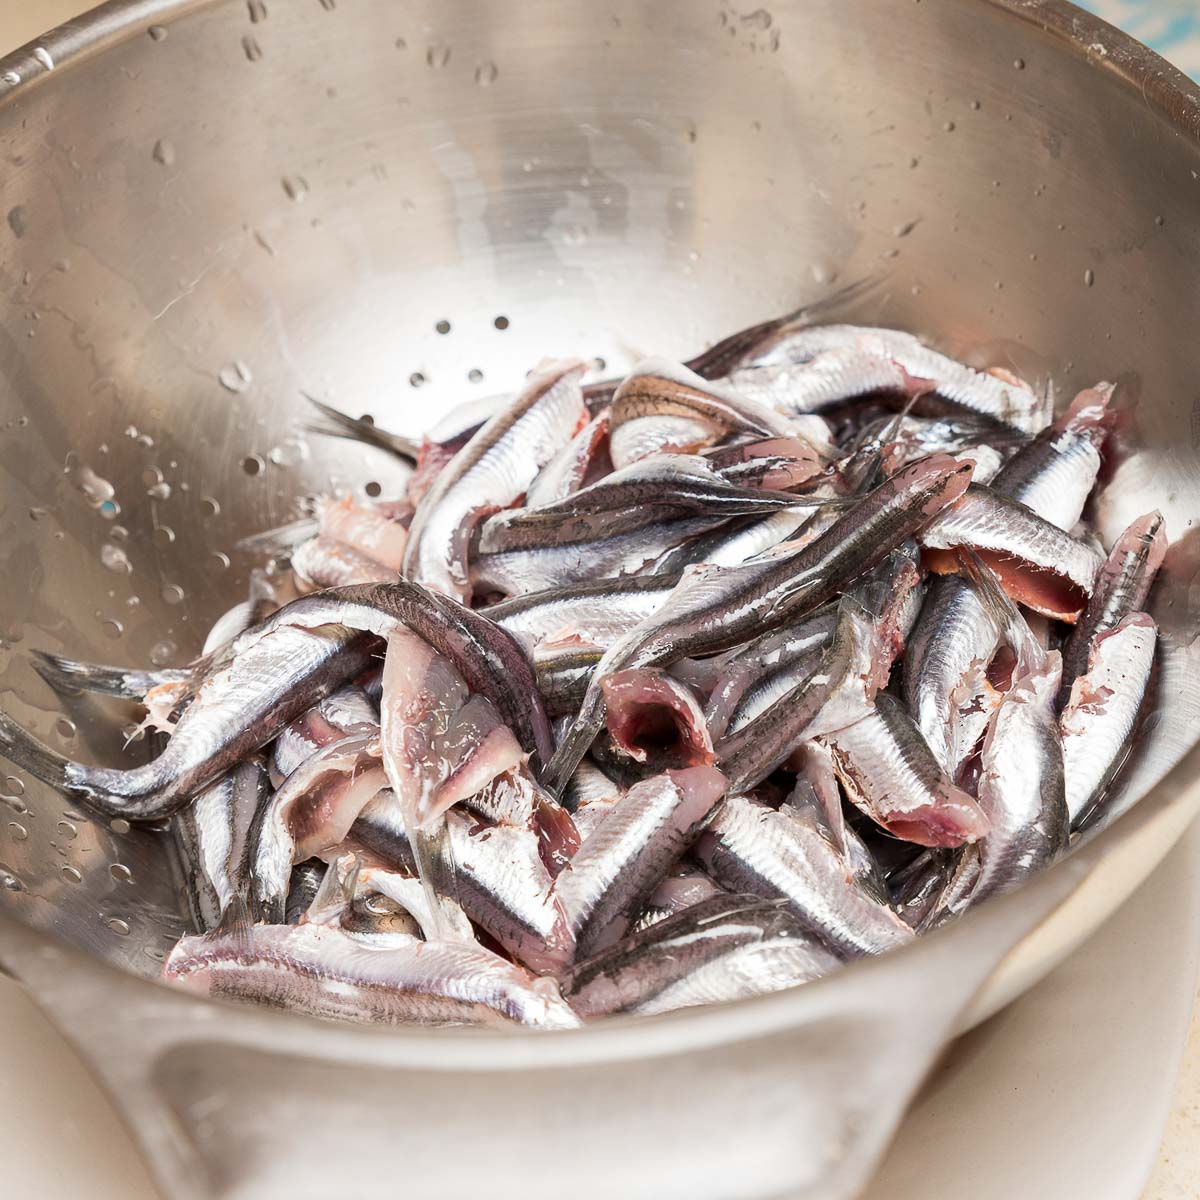 Cleaned fresh anchovies in a bowl